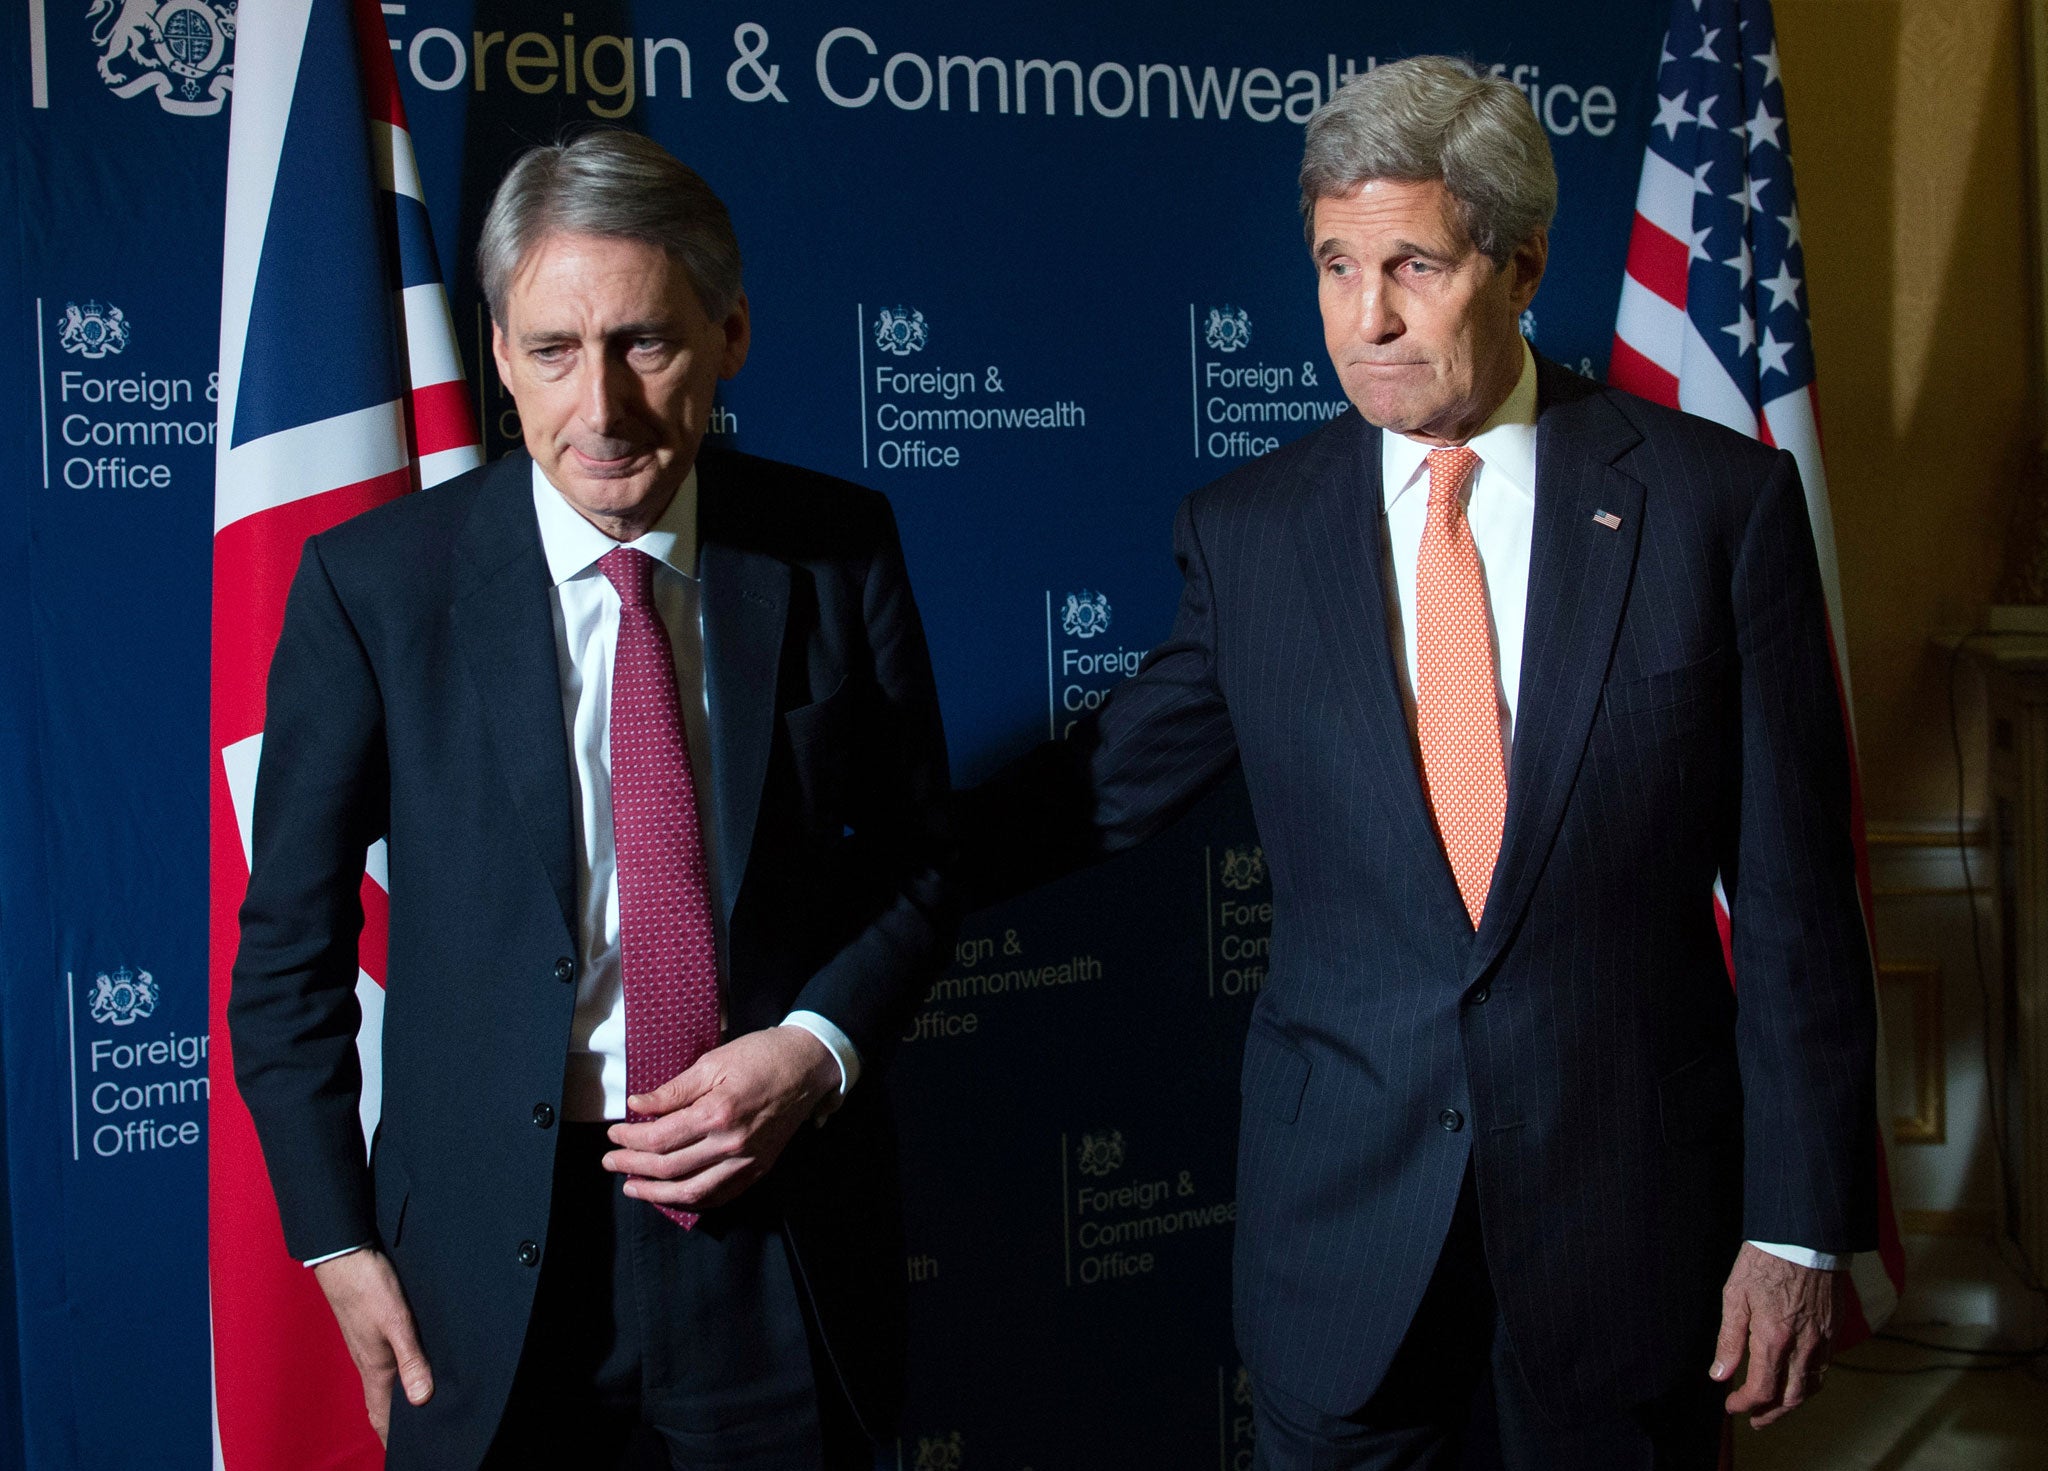 Defence Secretary Philip Hammond joined The US Secretary of State John Kerry at the conference